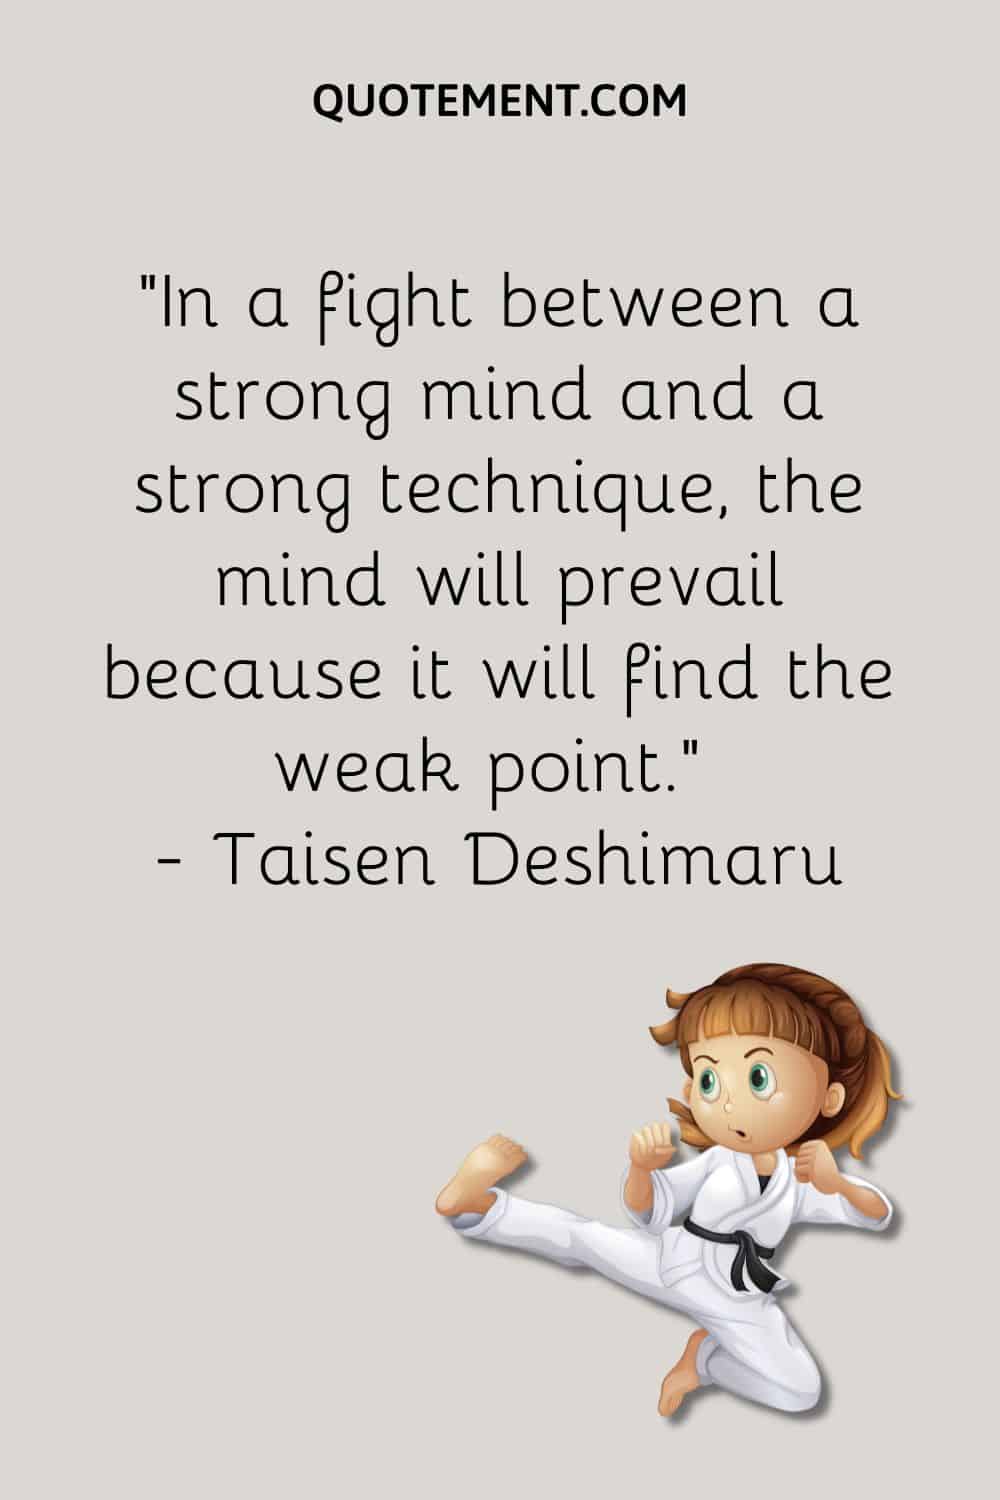 In a fight between a strong mind and a strong technique, the mind will prevail because it will find the weak point